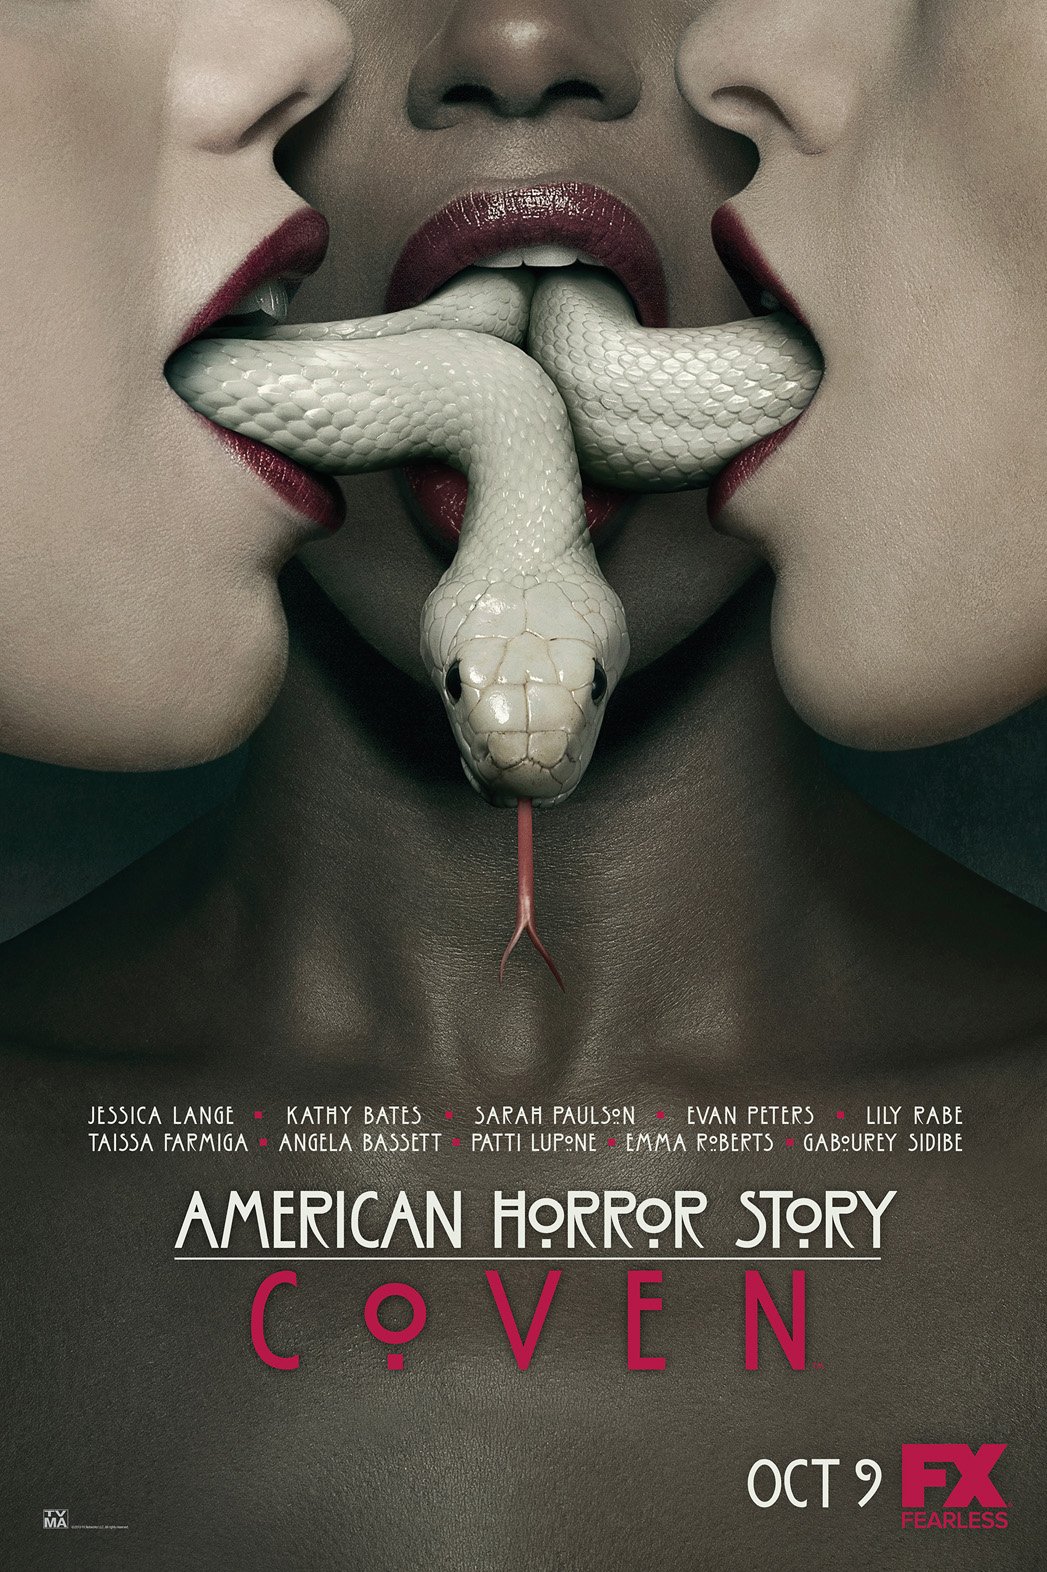 Geek insider, geekinsider, geekinsider. Com,, where is the magic in american horror story: coven? , entertainment